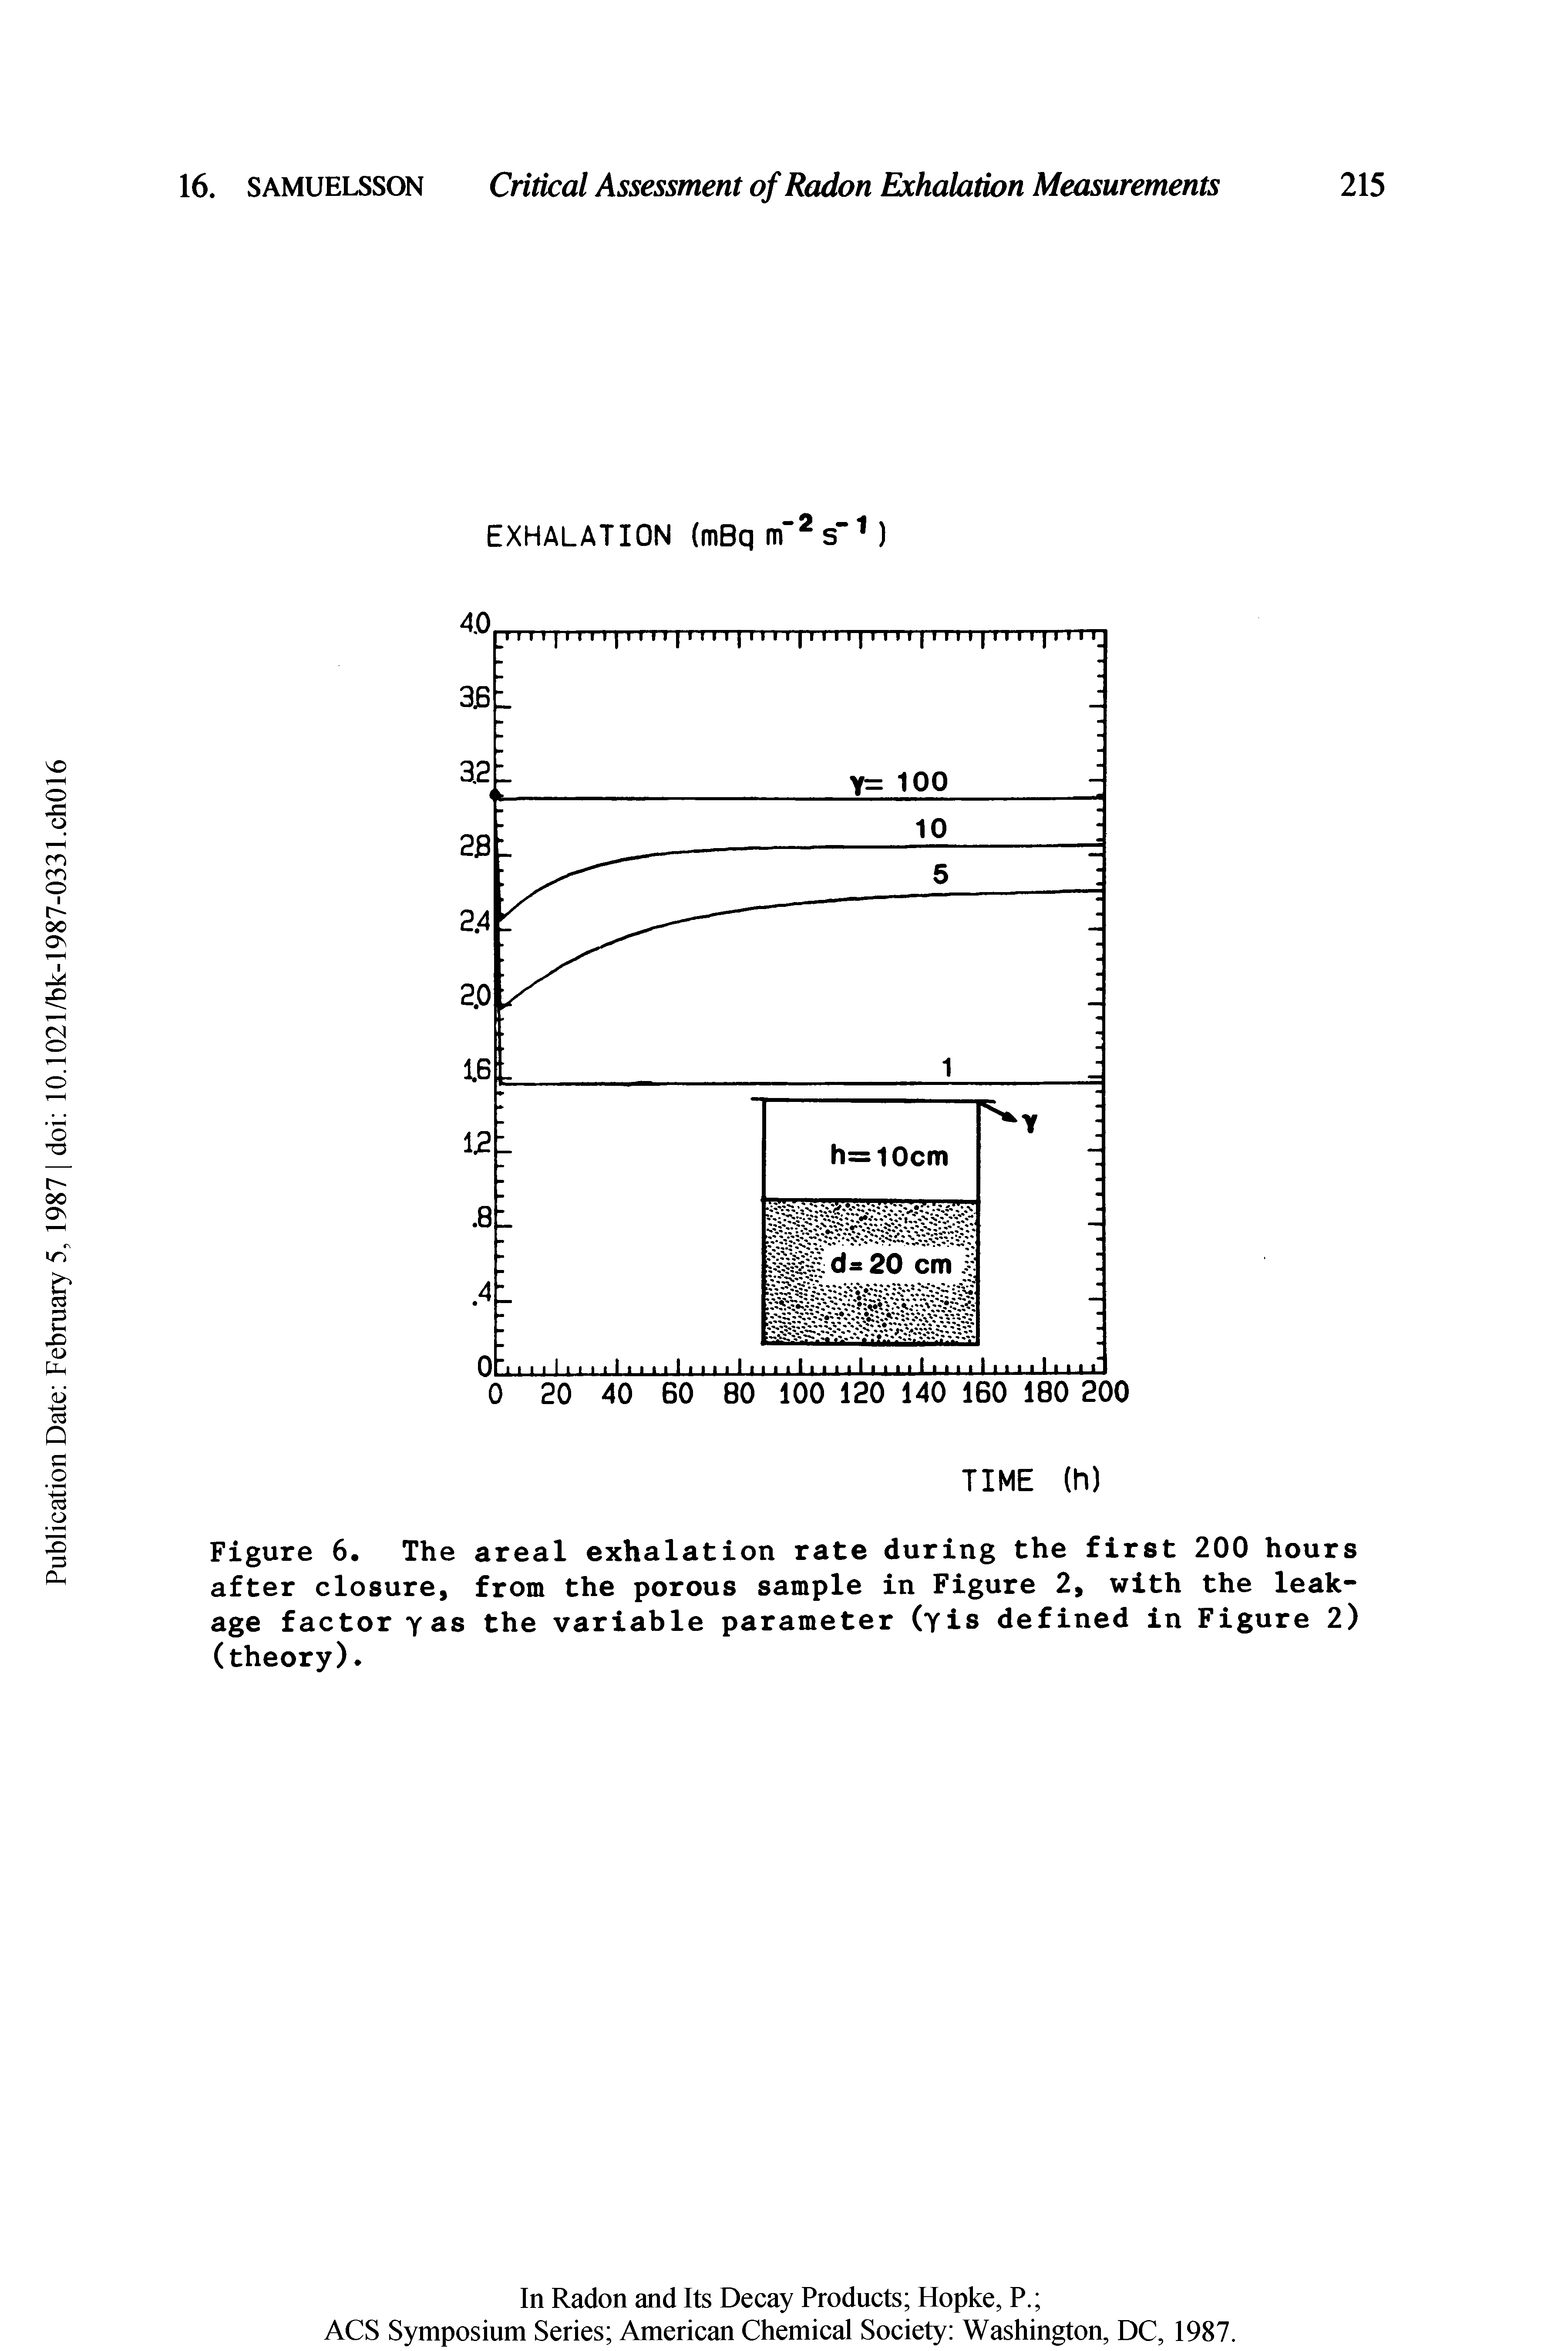 Figure 6. The areal exhalation rate during the first 200 hours after closure, from the porous sample in Figure 2, with the leakage factor yas the variable parameter (yis defined in Figure 2) (theory).